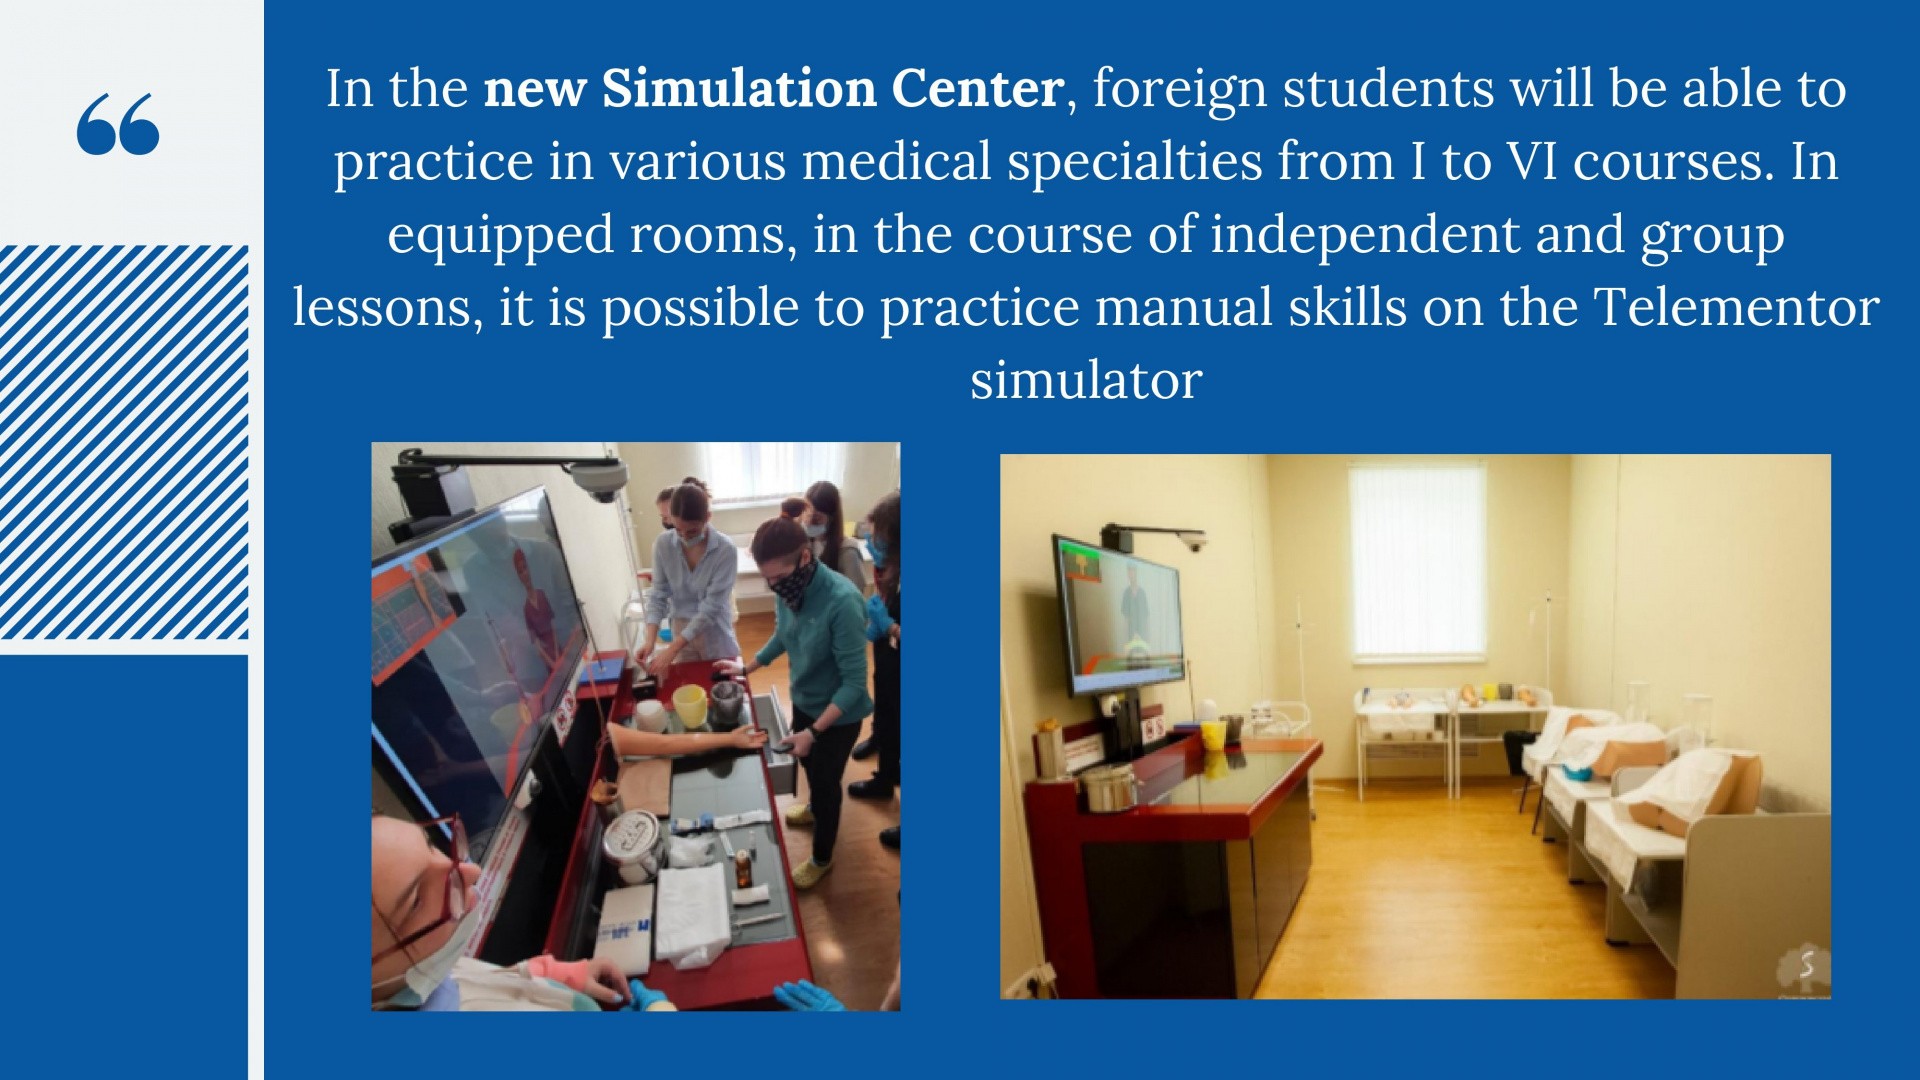 Simulation Center for Foreign Students_00004.jpg